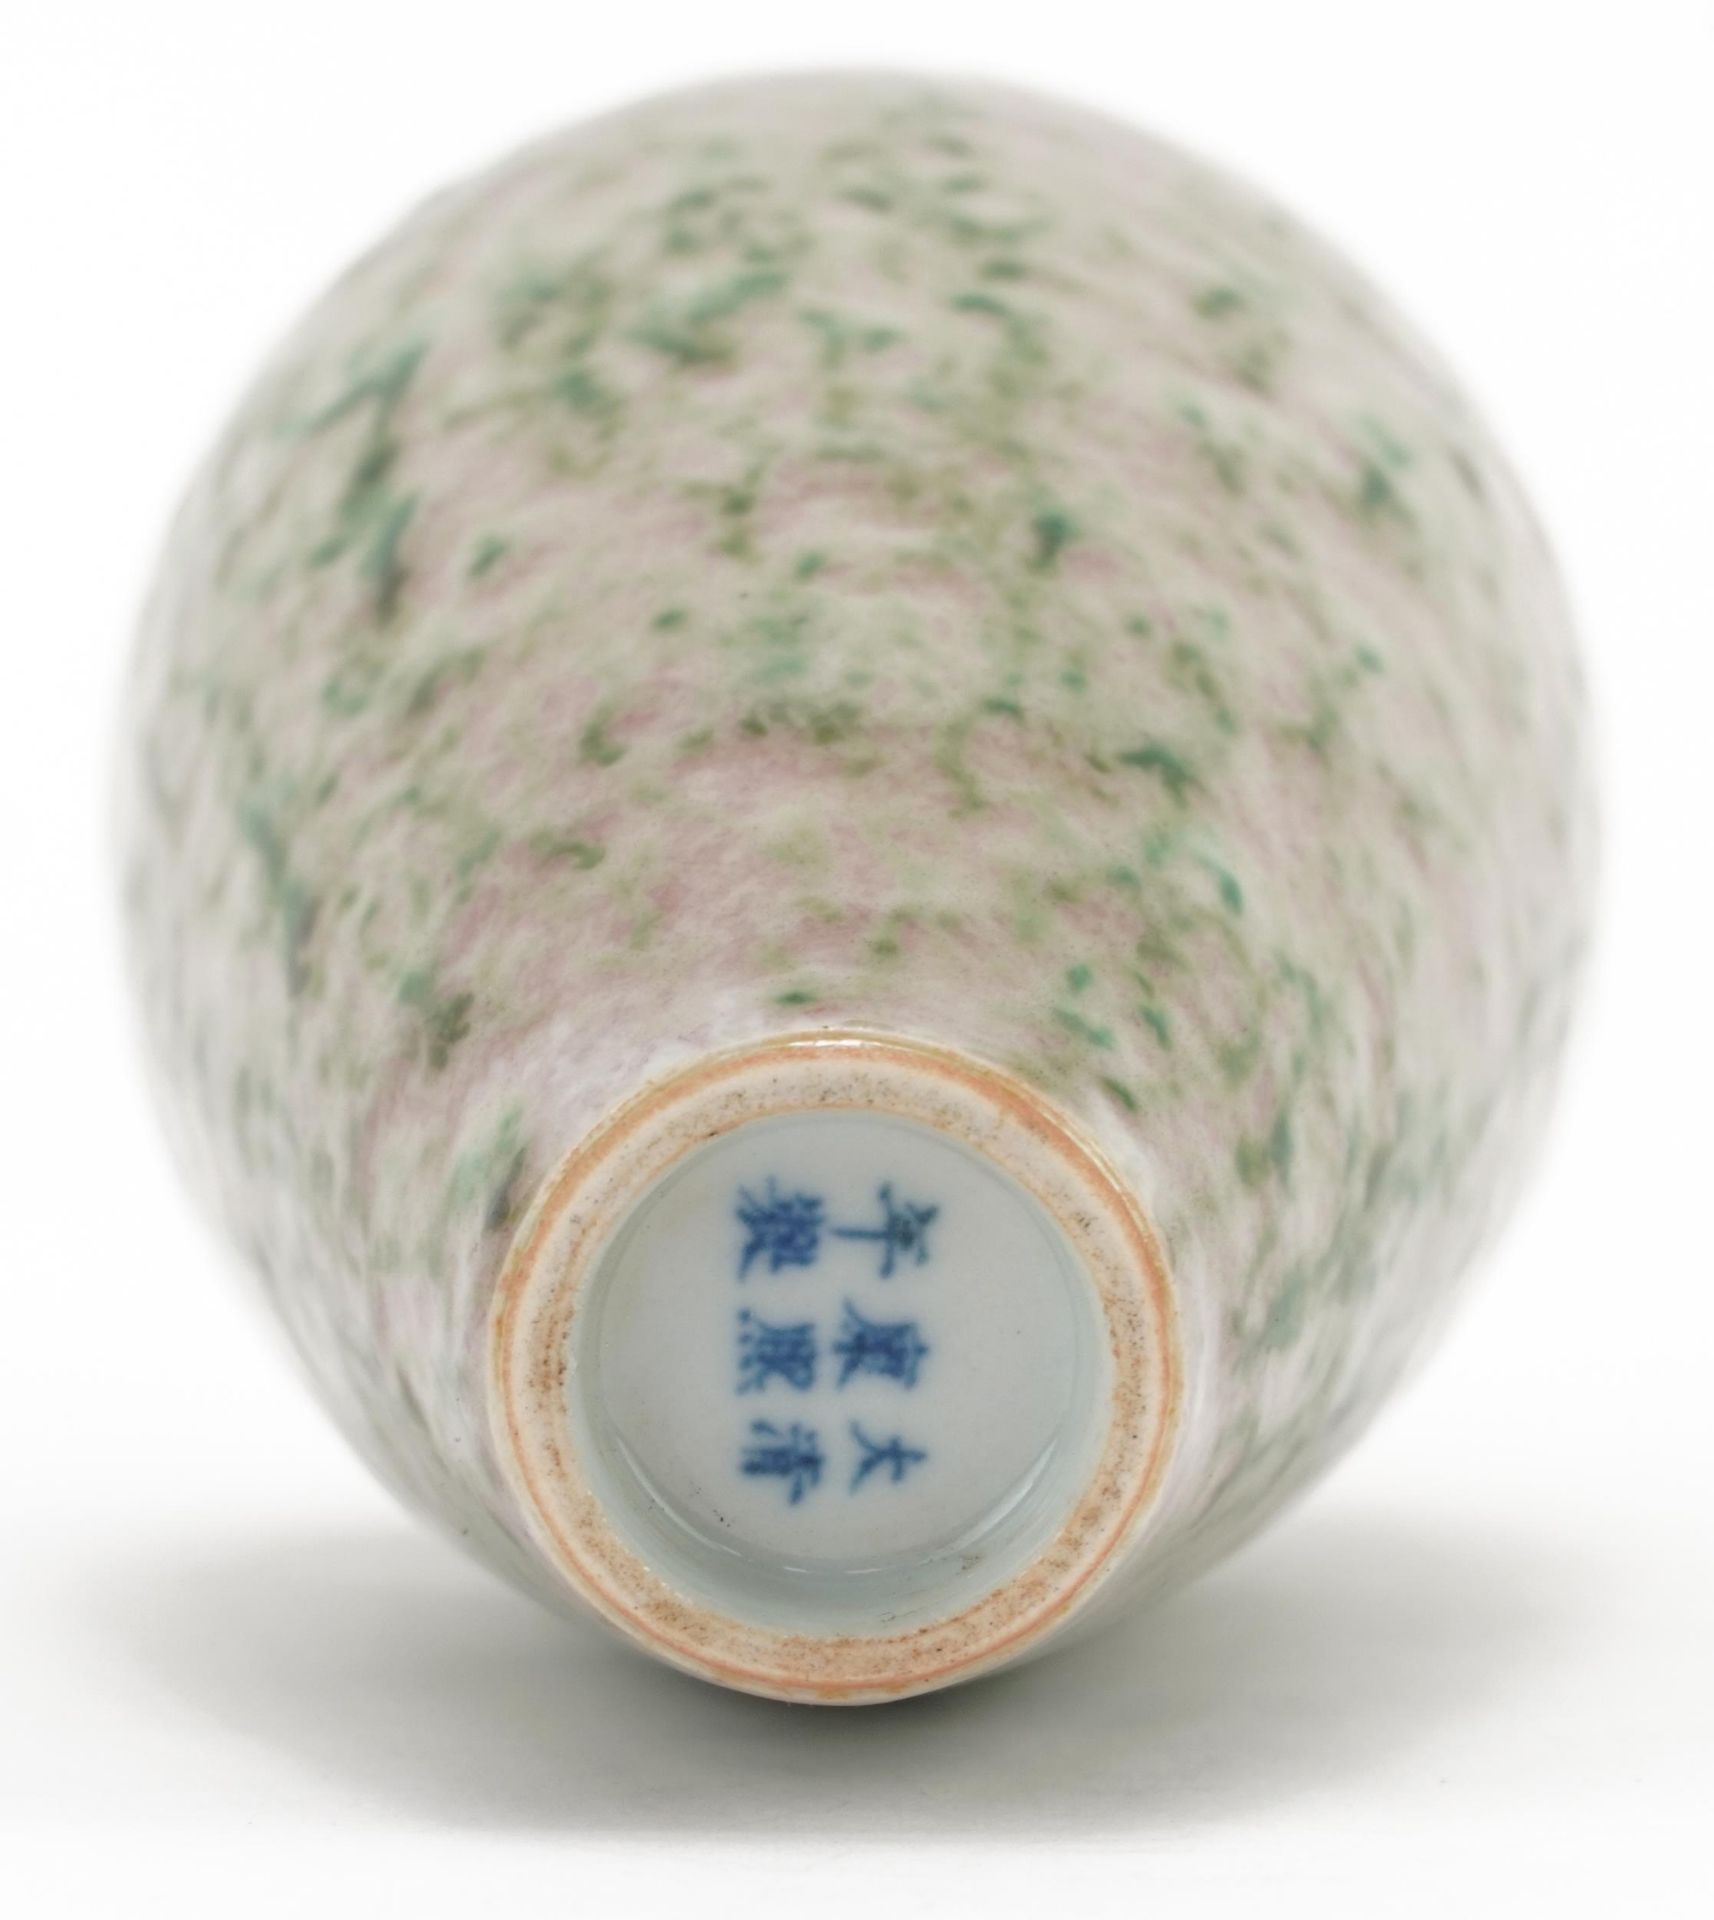 Chinese porcelain vase having a spotted green and red glaze, six figure character marks to the base - Image 6 of 8